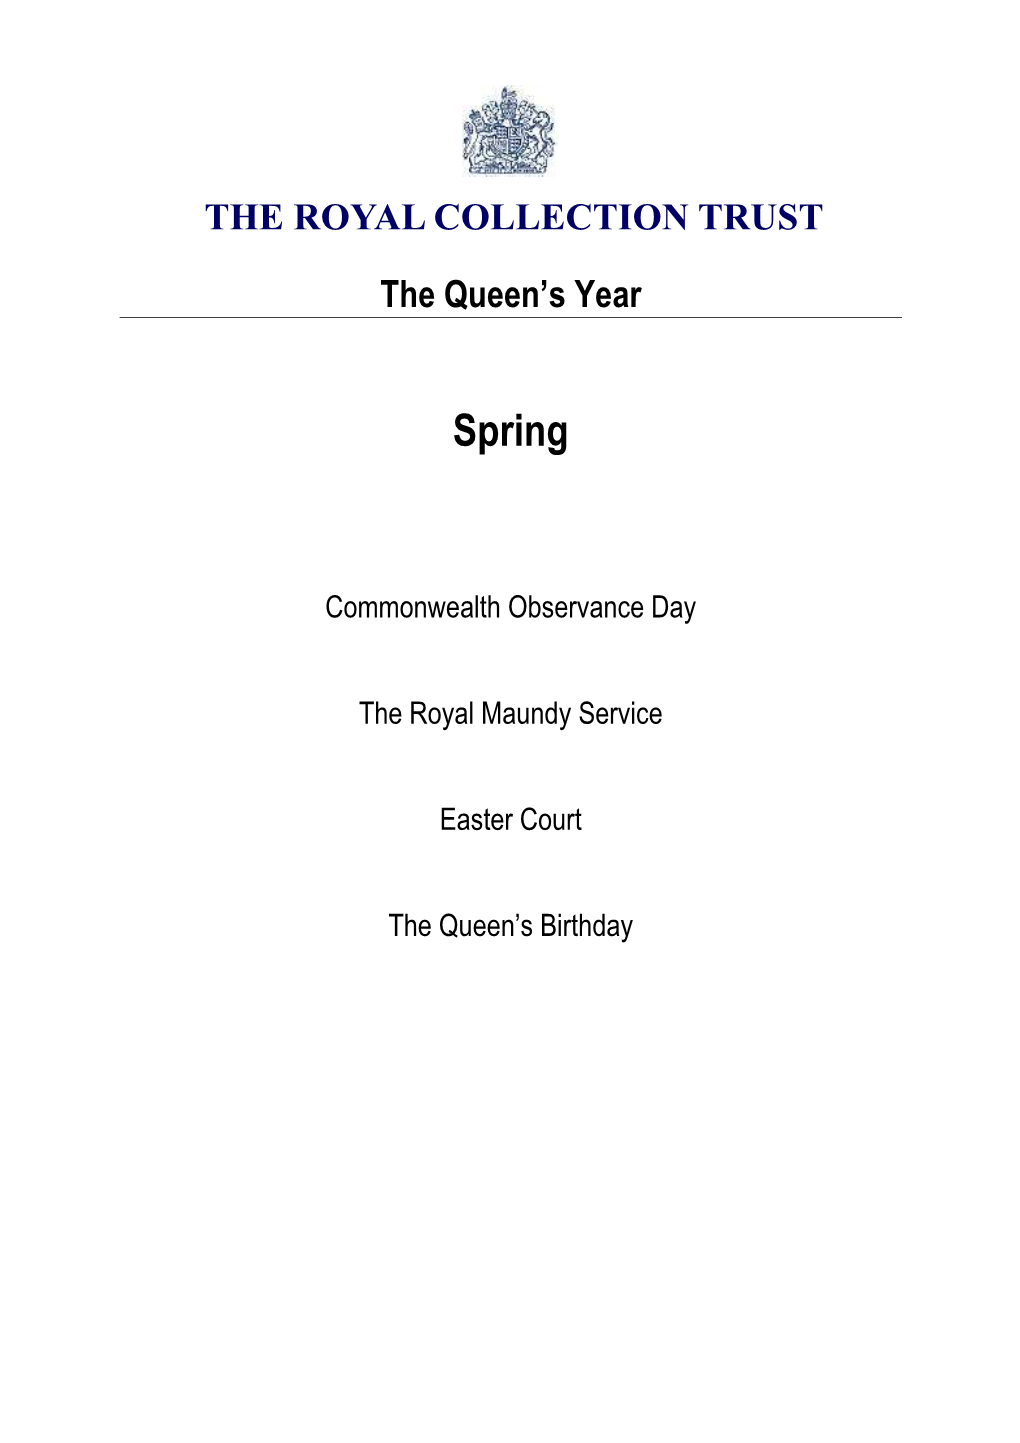 The Queen's Year